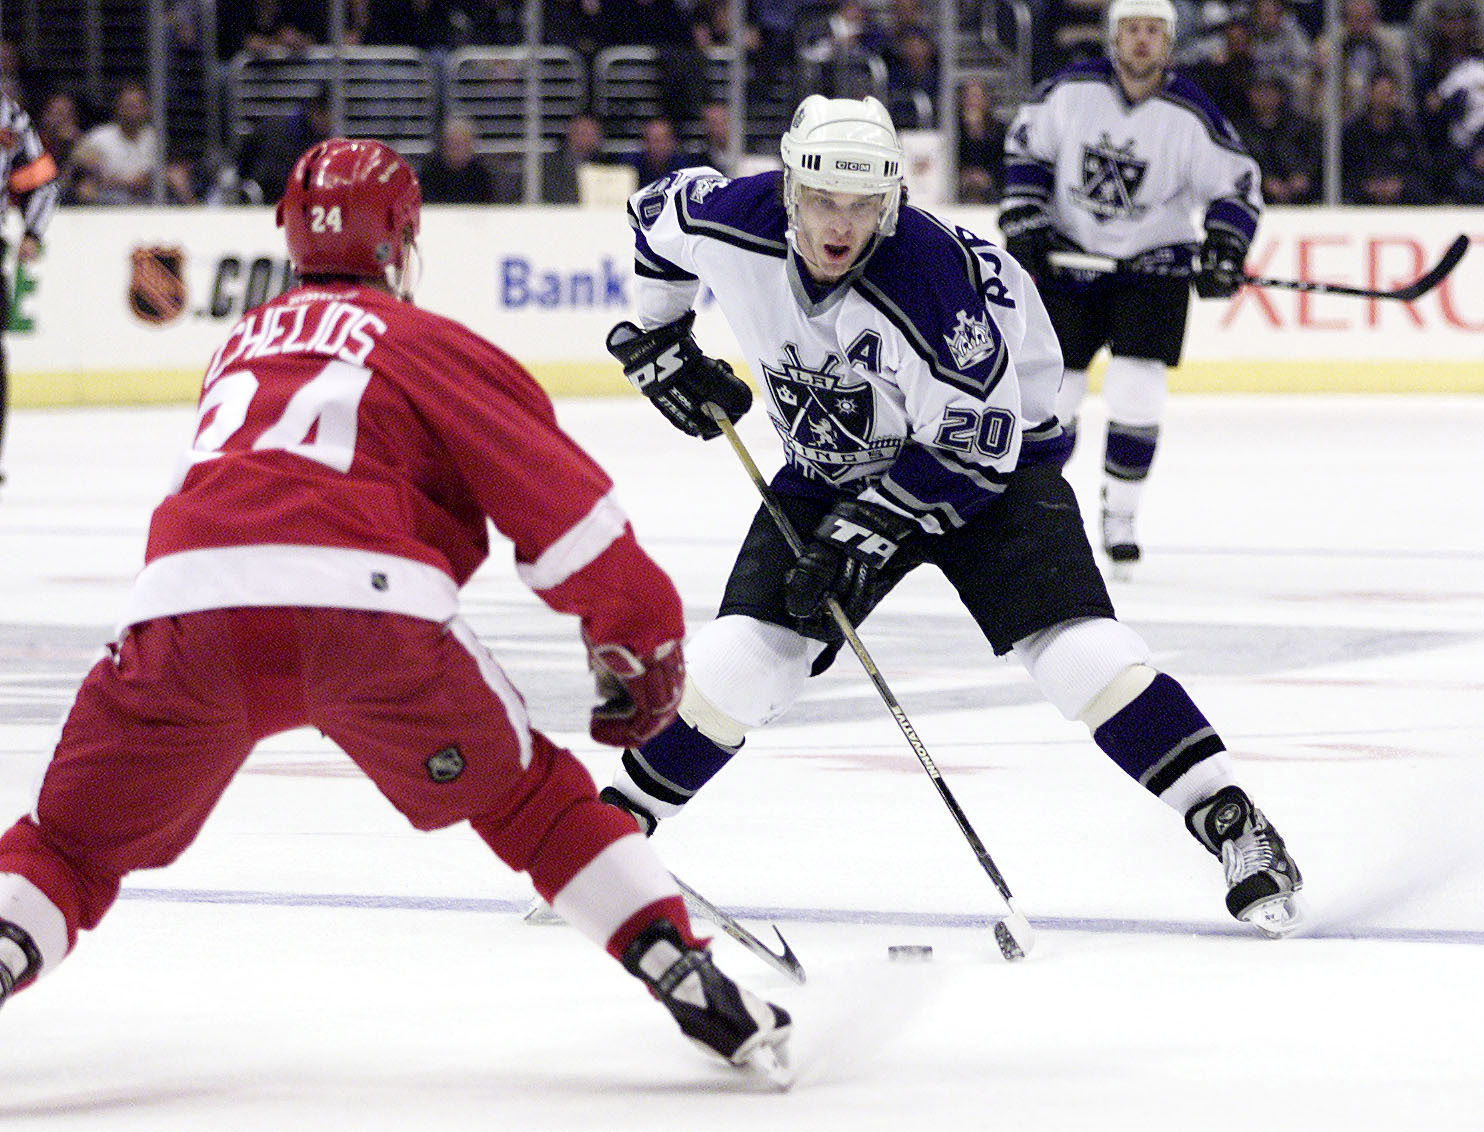 23 Apr 2001: Luc Robitaille #20 of the Los Angeles Kings moves the puck against the defense of Chris Chelios #20 of the Detroit Red Wings in Game Six of the NHL Western Conference Playoffs Quarterfinals at the Staples Center in Los Angeles, California. DI